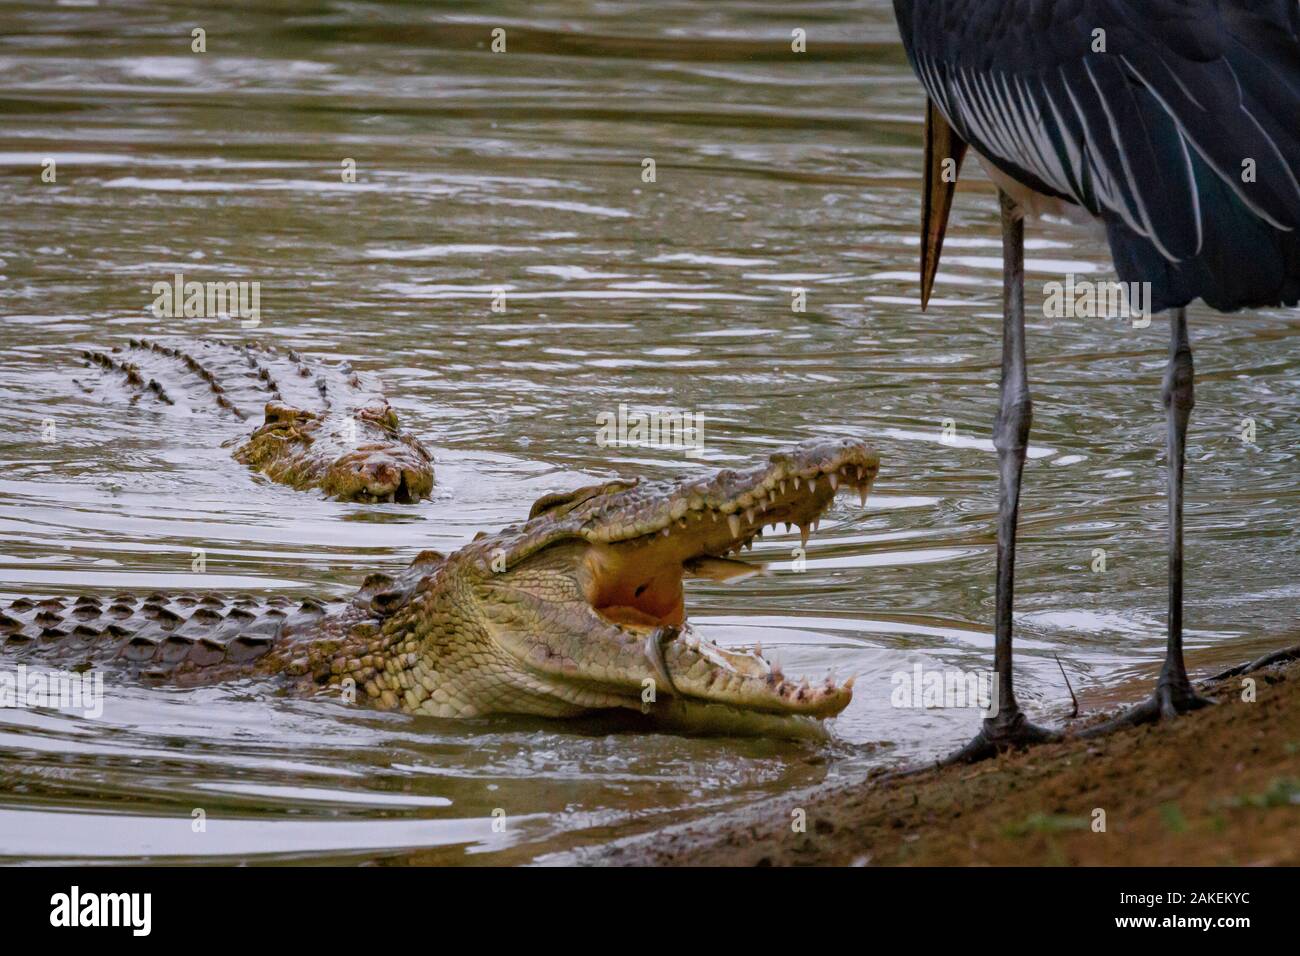 Nile crocodile (Crocodylus niloticus) surfacing to eat tiny fish whilst a Marabou stork (Leptoptilos crumenifer) looks on, ready to steal a fish if the opportunity arose. Msicadzi River, Gorongosa National Park, Mozambique. During the  dry season many water sources dry up trapping fish in smaller areas. Many birds and crocodiles gather to feed on this  abundant food source. Stock Photo